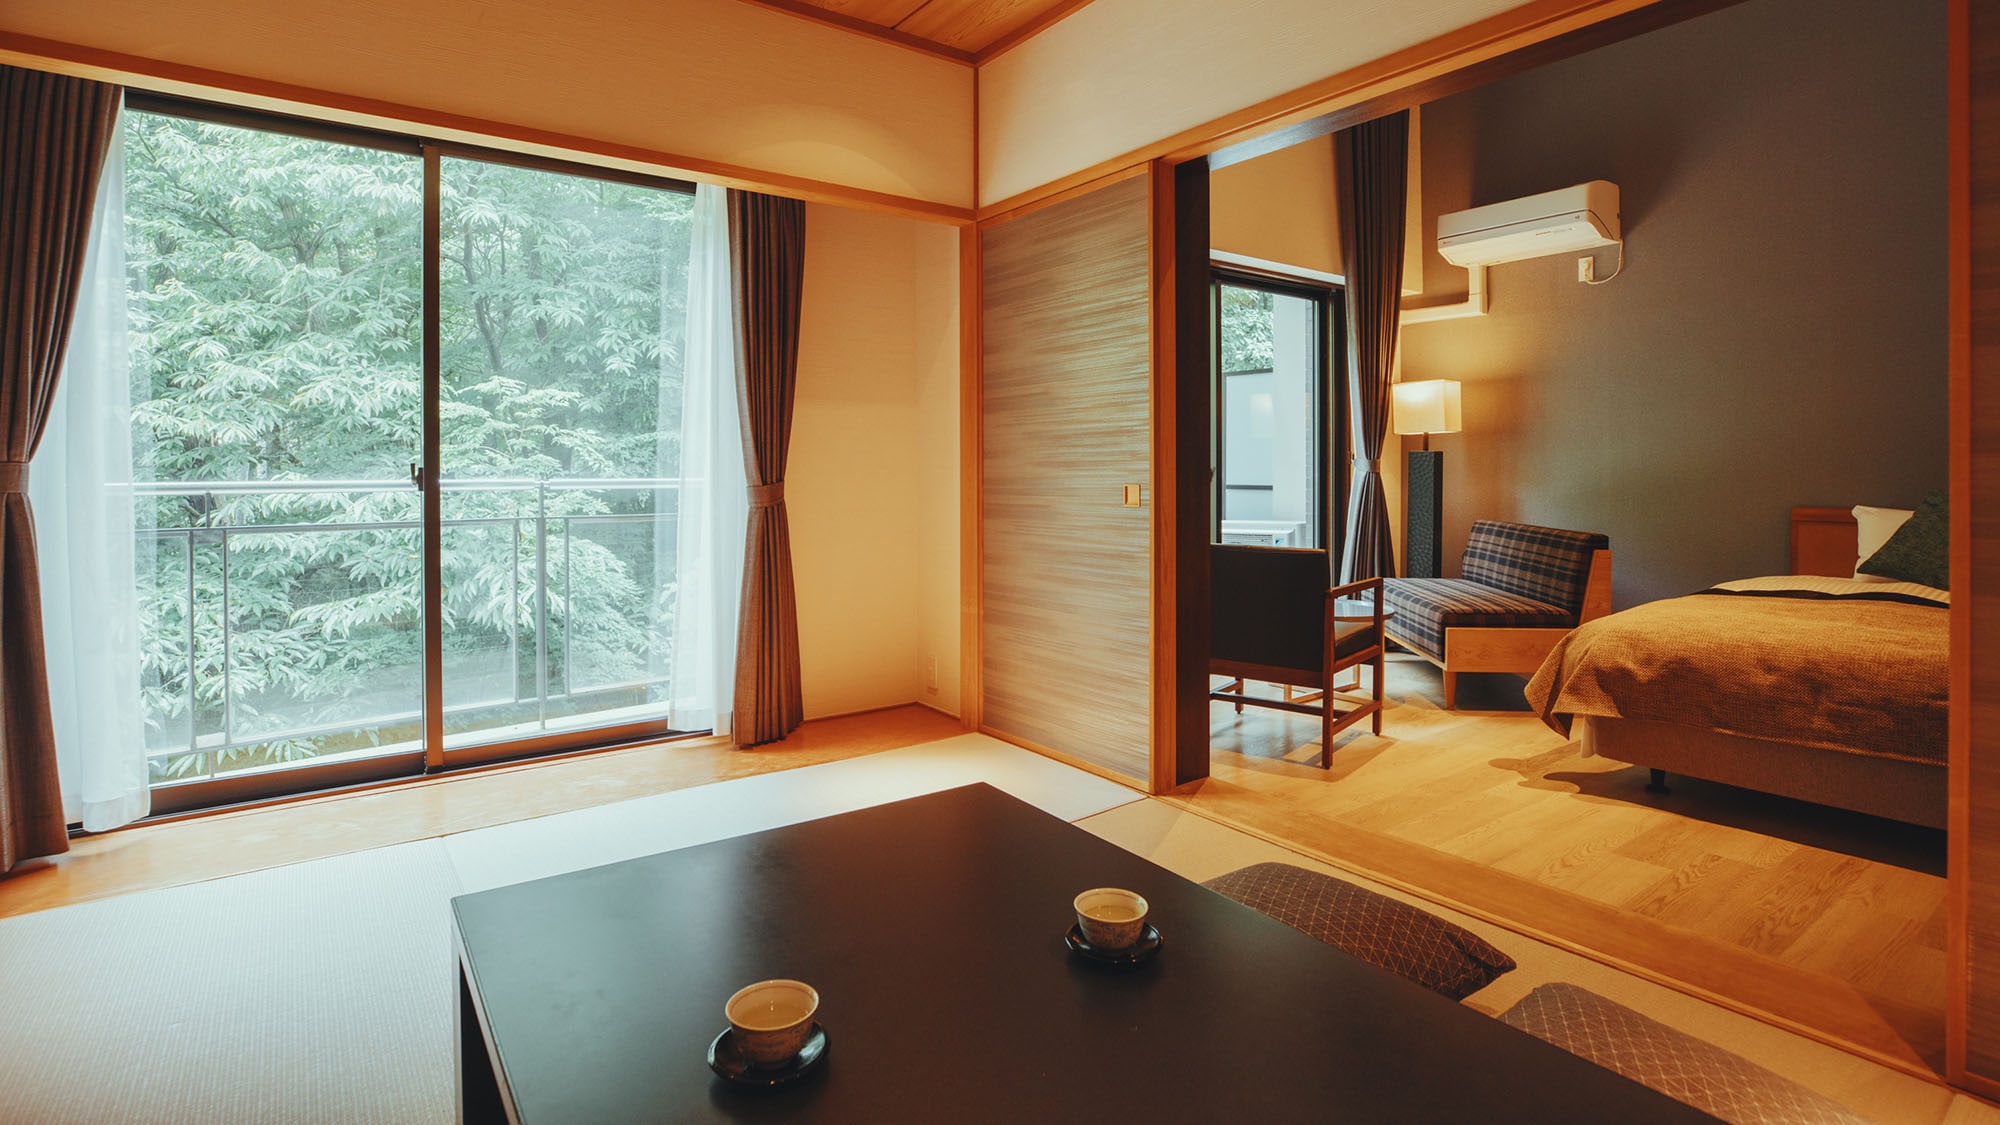 ■ Japanese and Western rooms